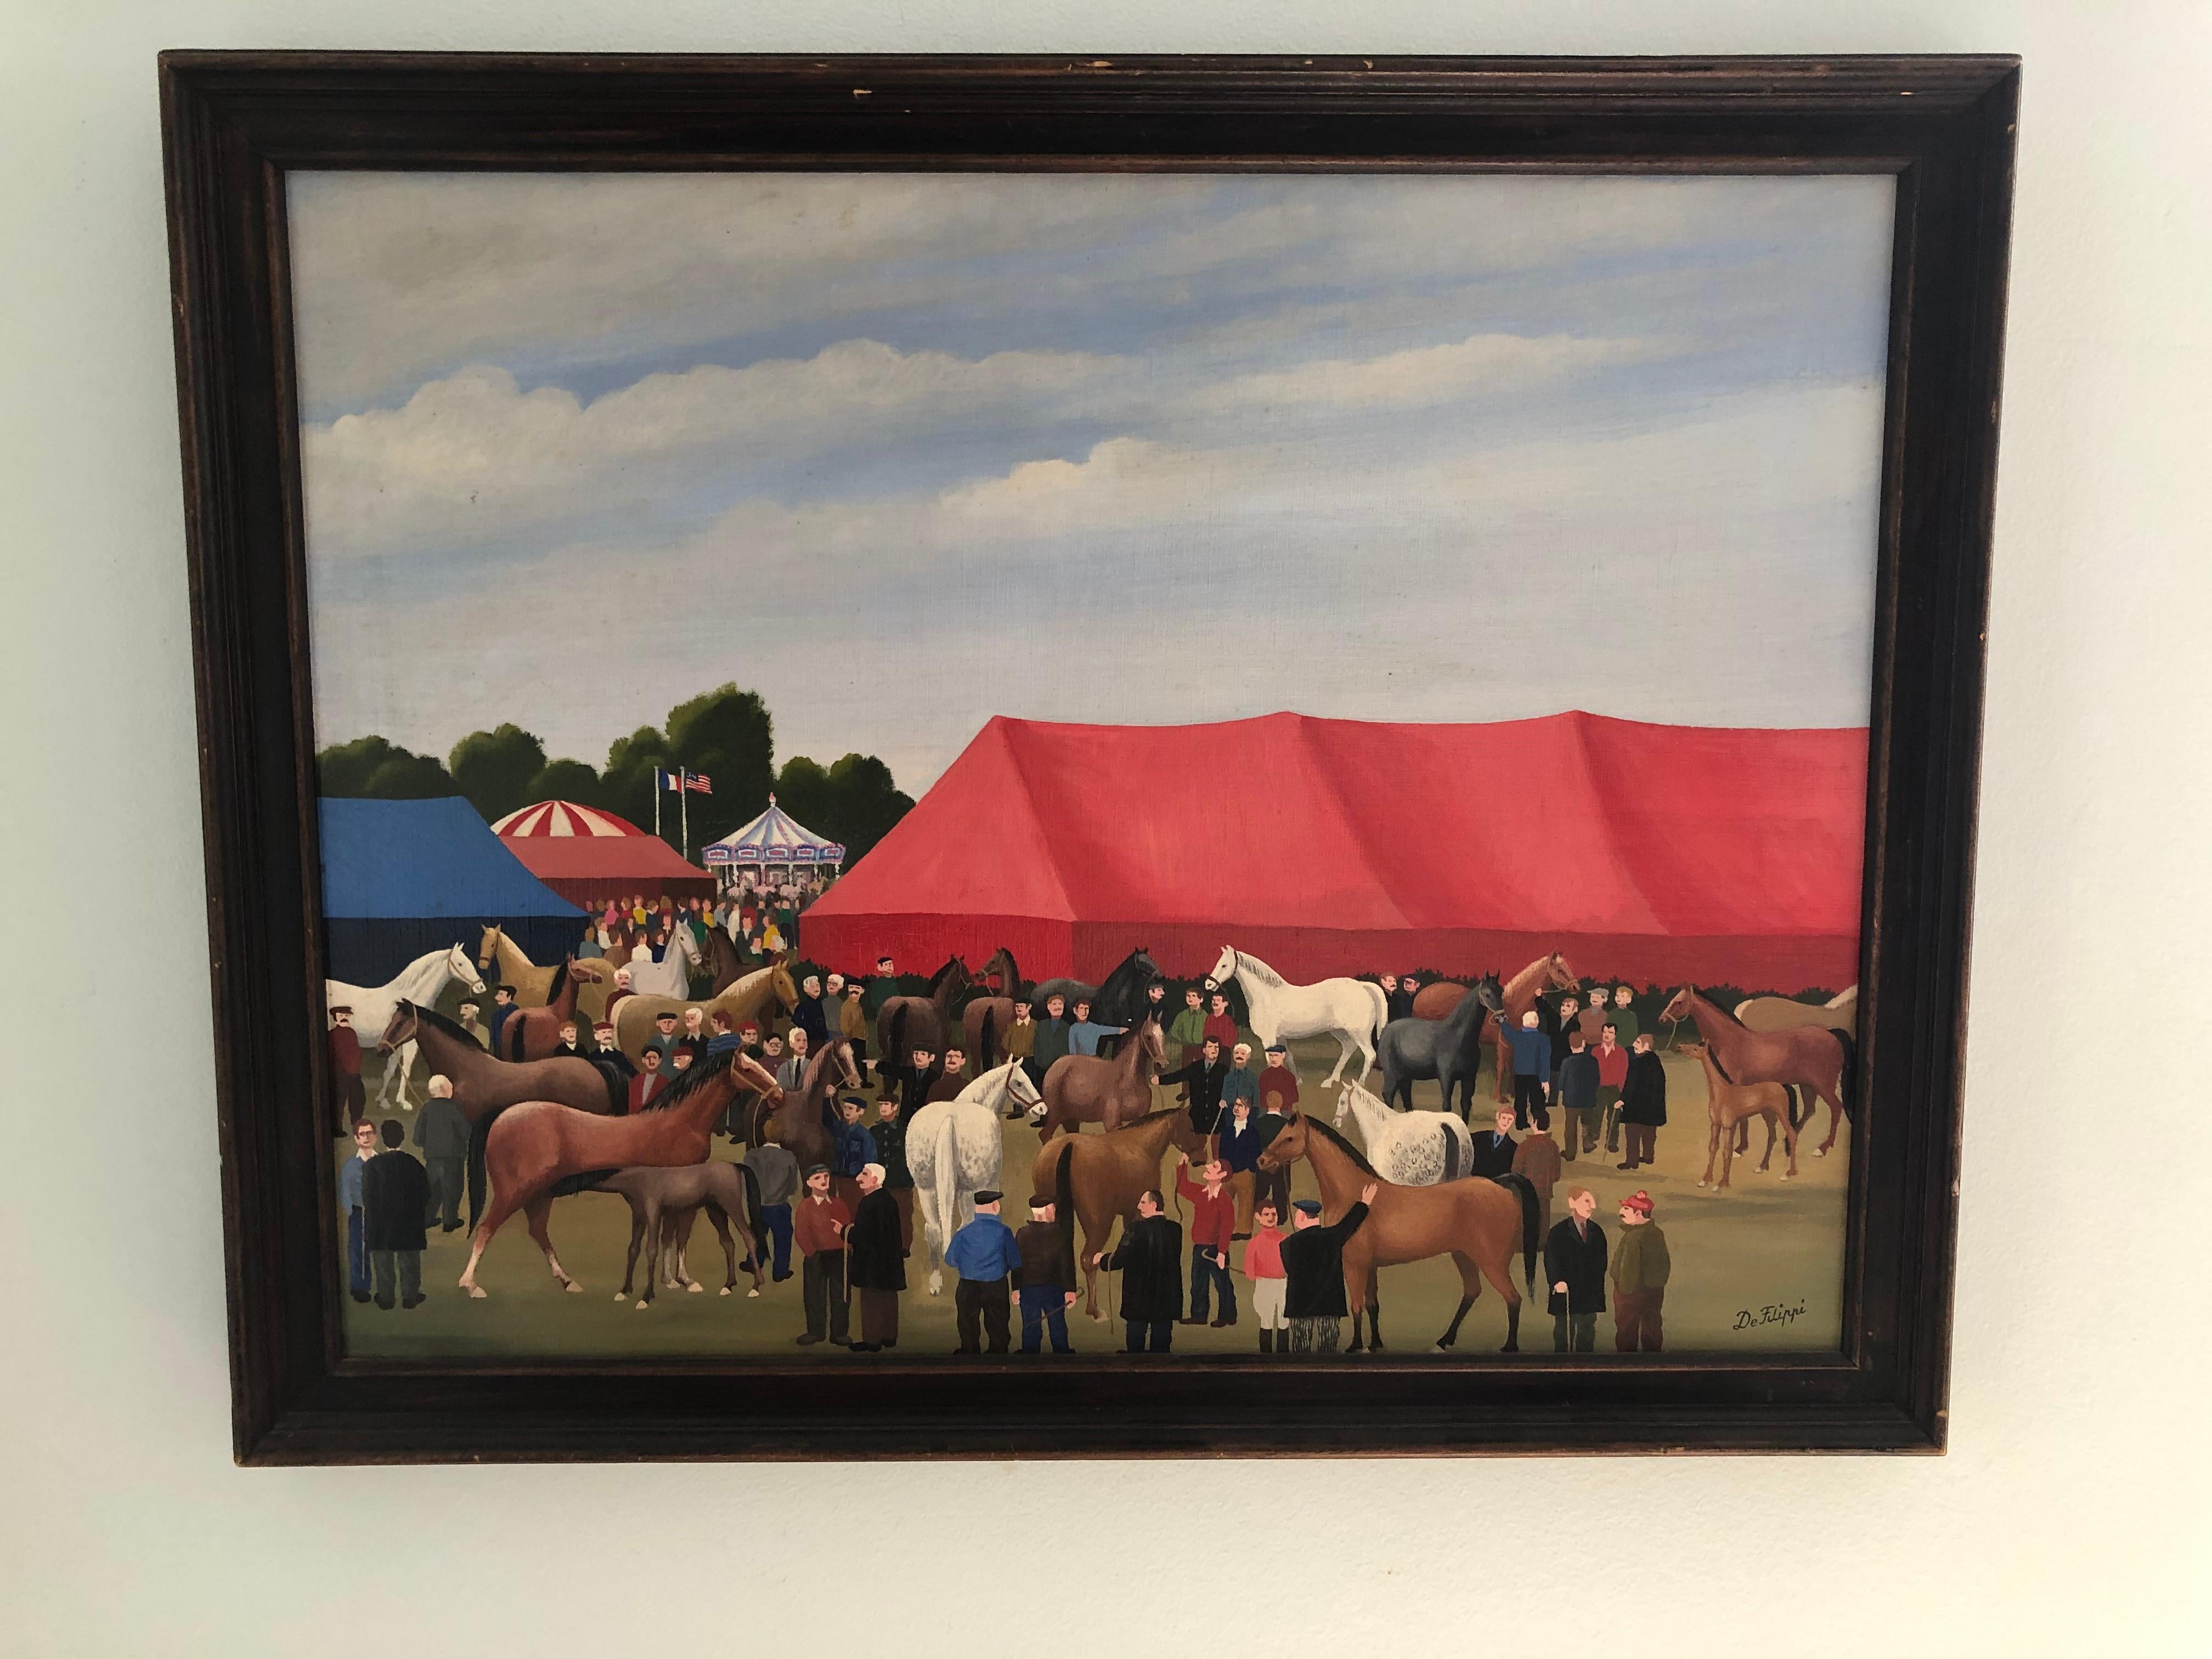 Wonderful and rare Serge De Filippi original oil on canvas painting. Charming colorful scene of  a horse show and fair. Measures 25 3/4 inches wide by 20 high. Frame measures 28 1/2 by 22 1/2. Painting is titled in French on back stretcher bar. A